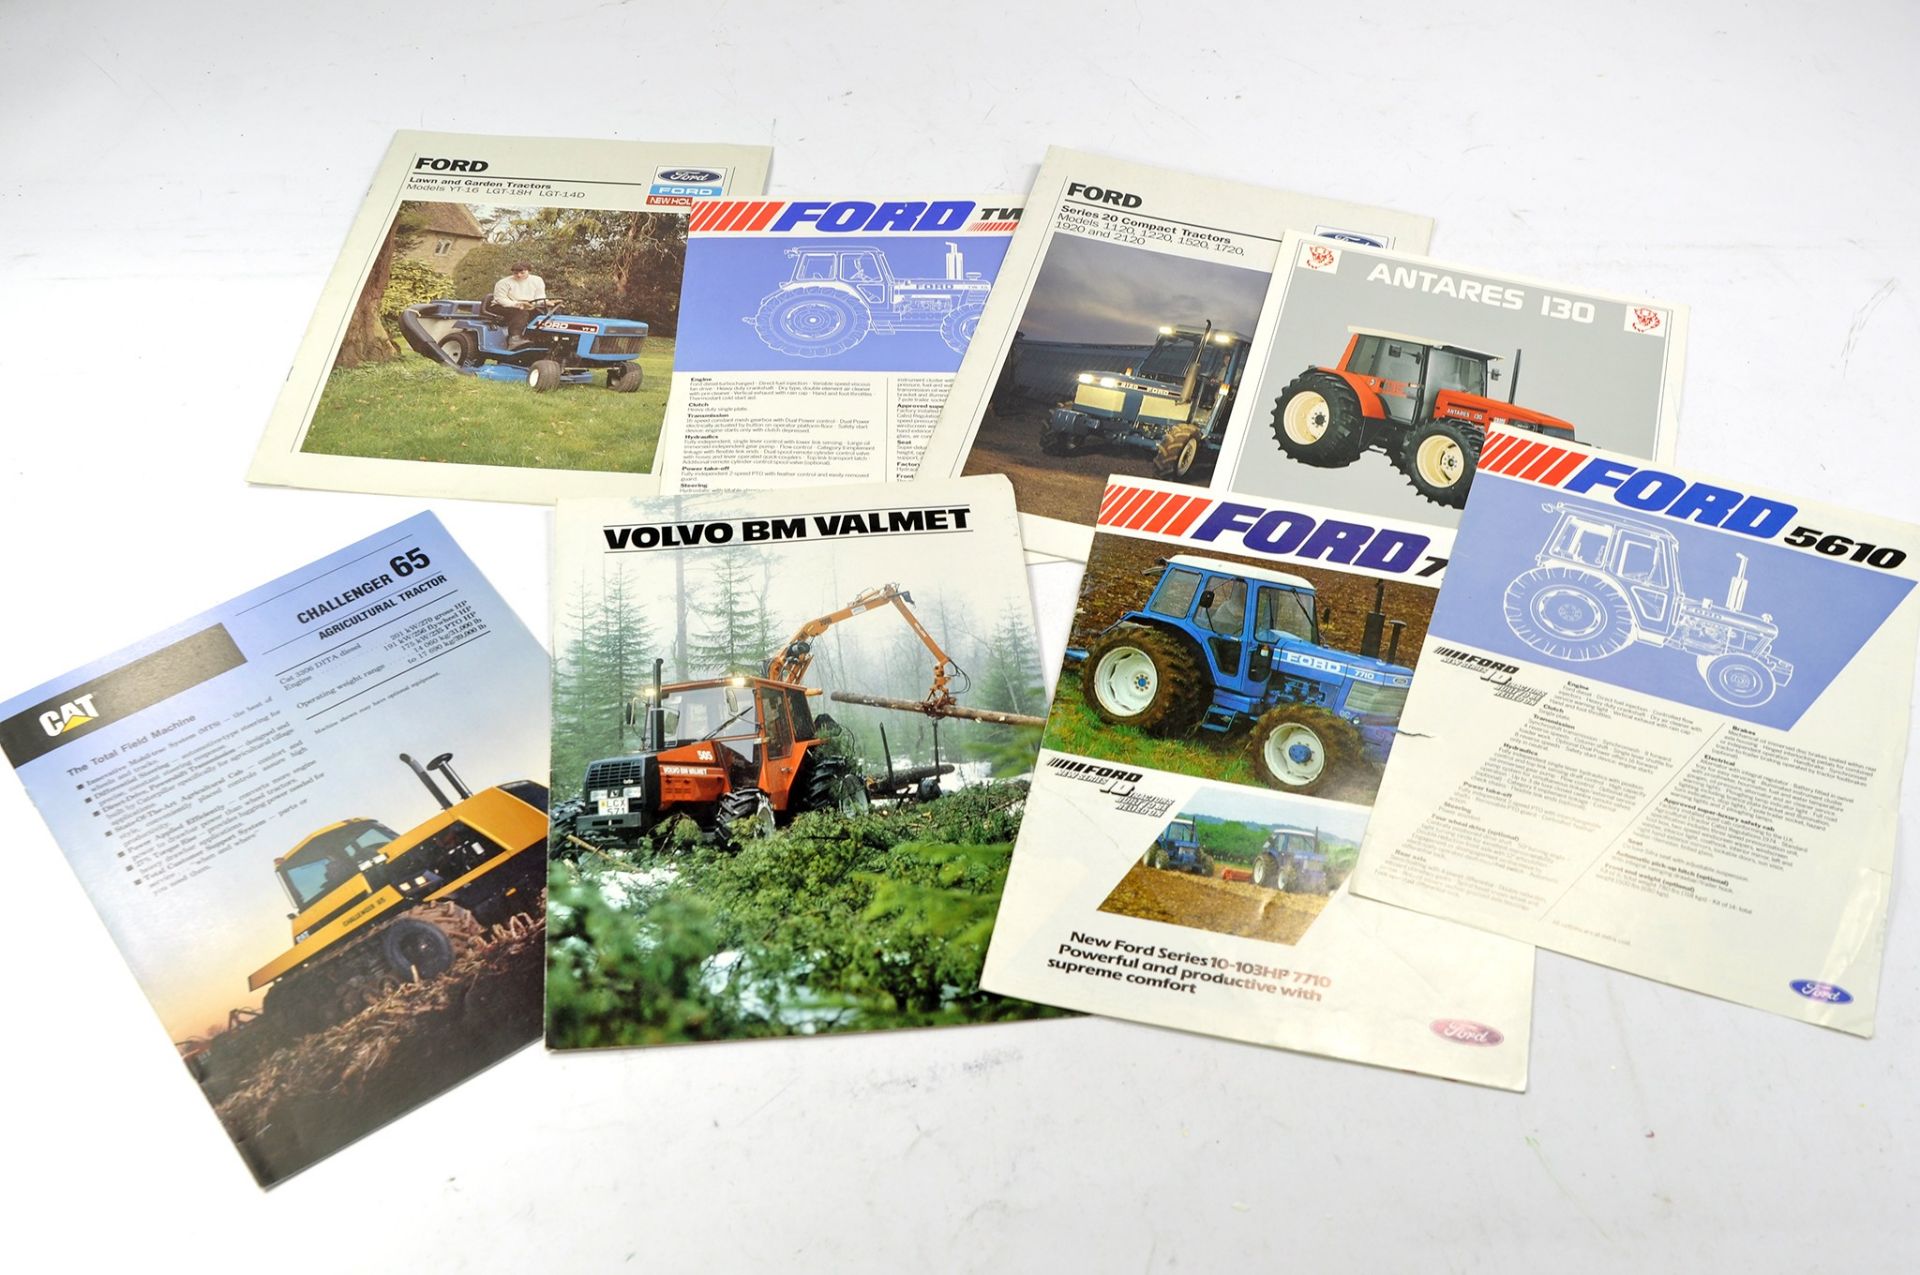 Tractor and Machinery Literature comprising sales brochures and leaflets from Massey Ferguson, - Image 3 of 3